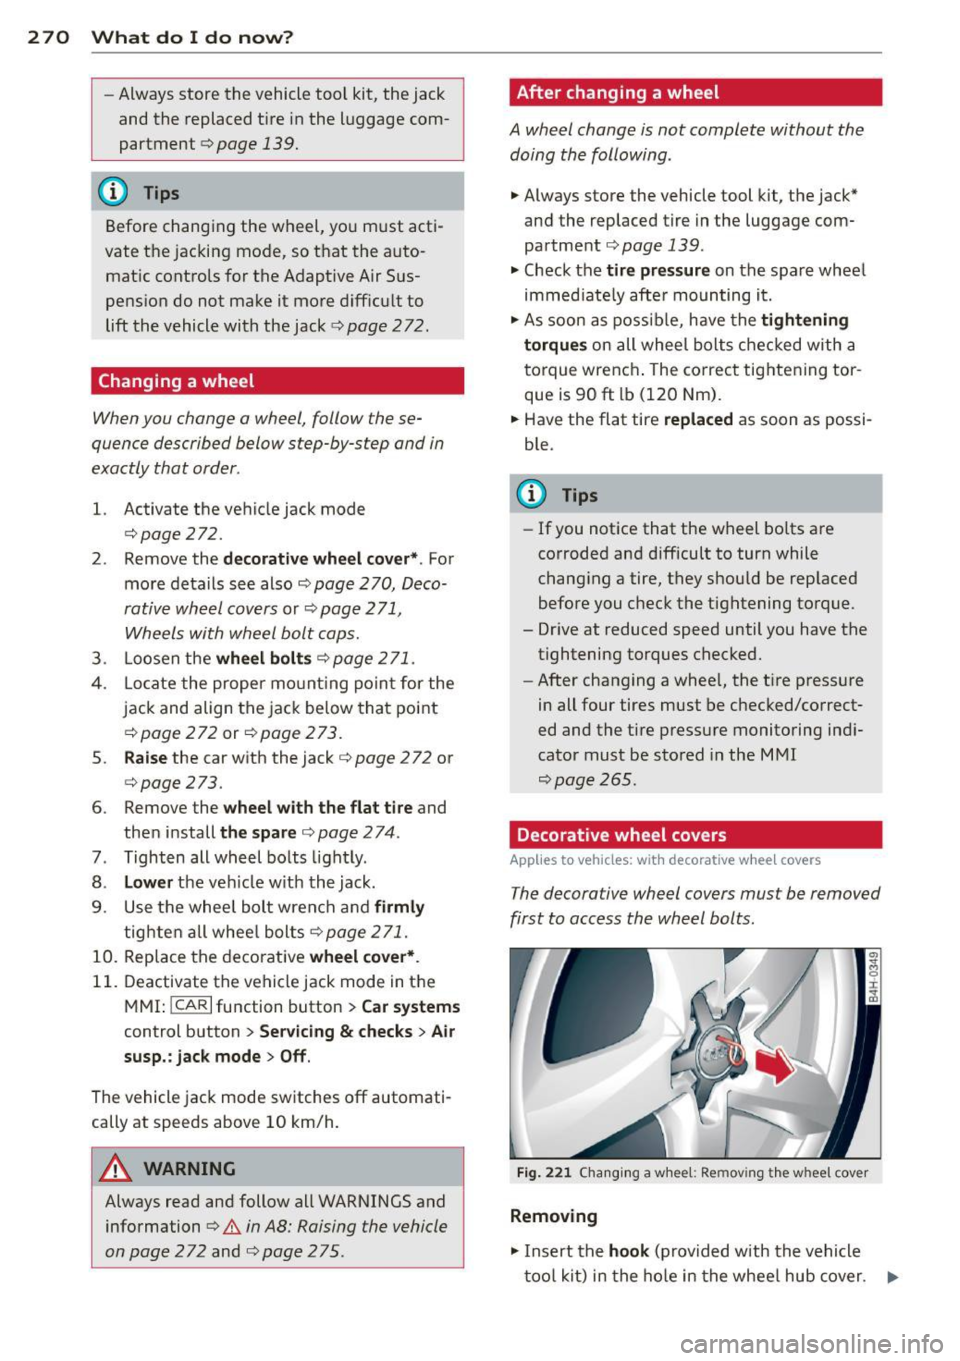 AUDI A8 2015  Owners Manual 2 70  What  do  I  do  now ? 
-Always store  the  vehicle  tool  kit,  the  jack 
and  the  replaced  t ire  in the  luggage  com­
partment ¢ 
page  139. 
@ Tips 
Before  changing  the  wheel,  yo u